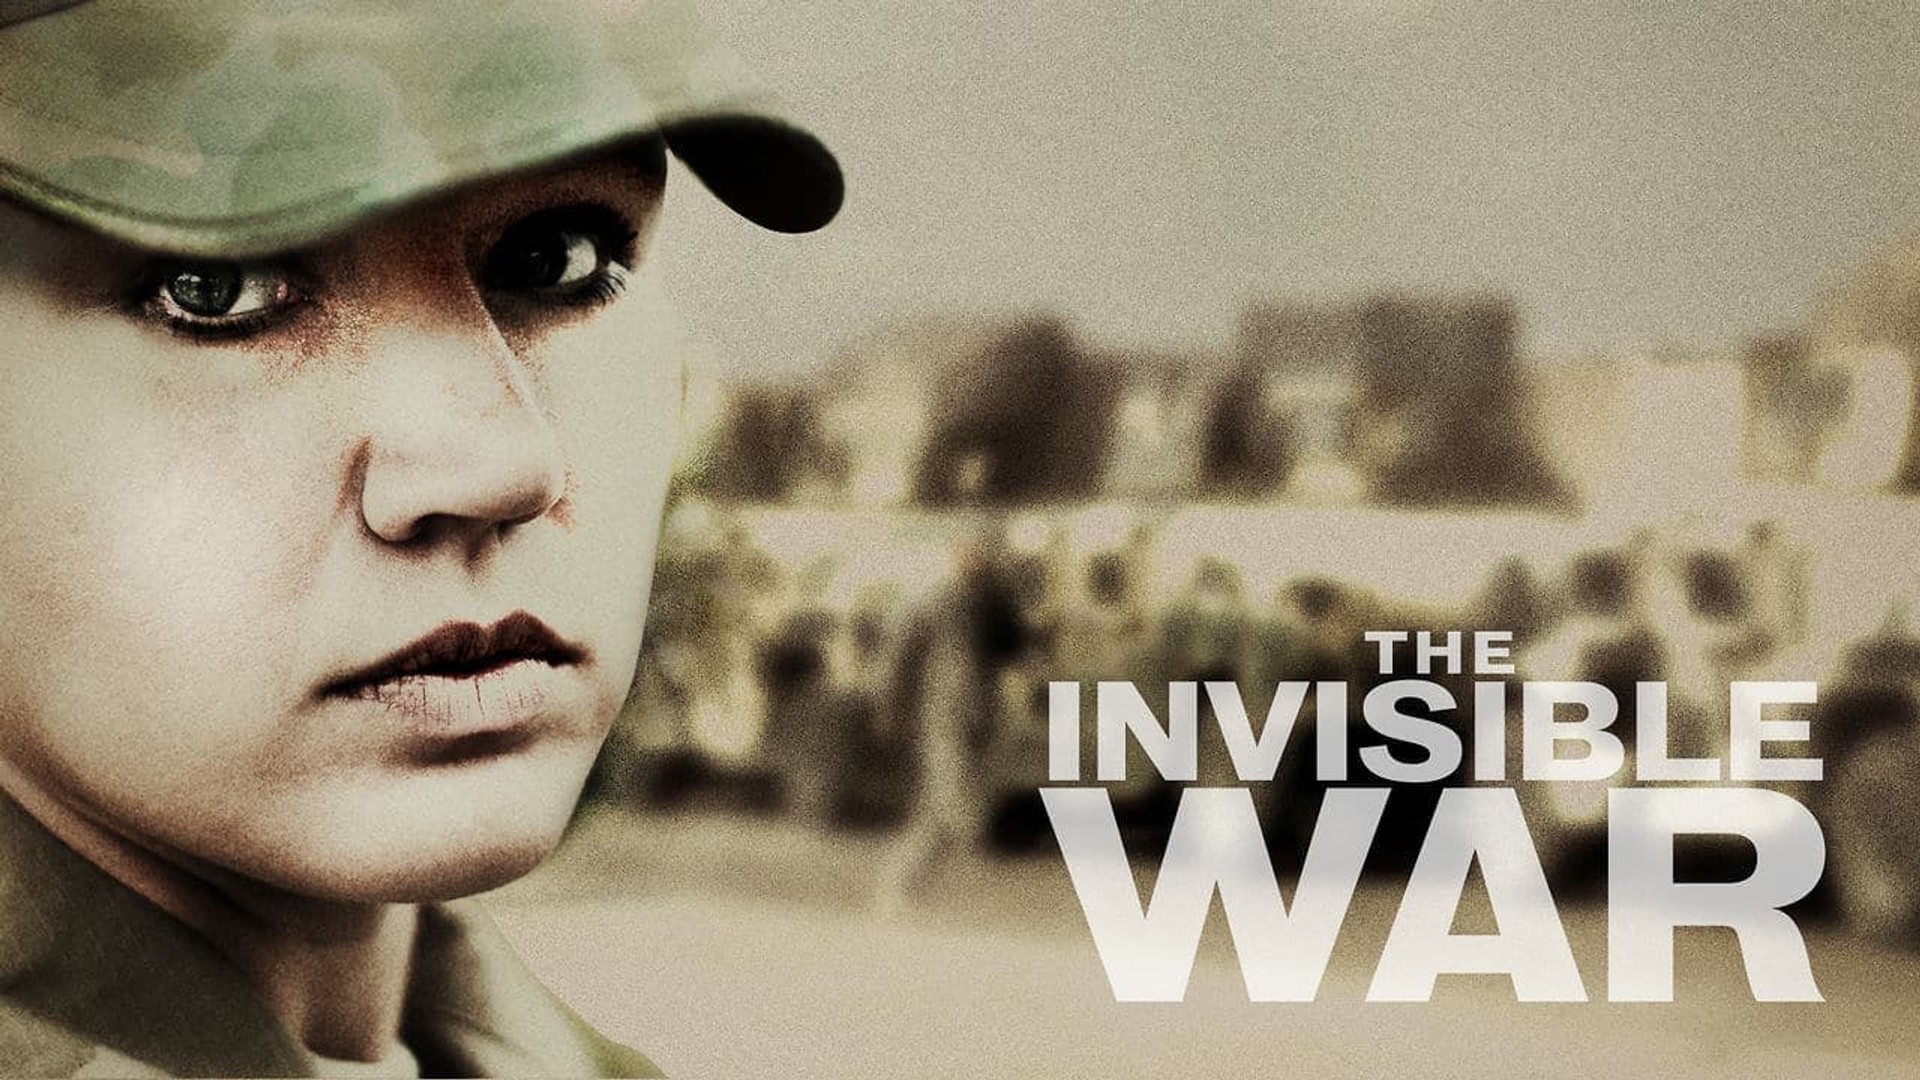 The Invisible War background